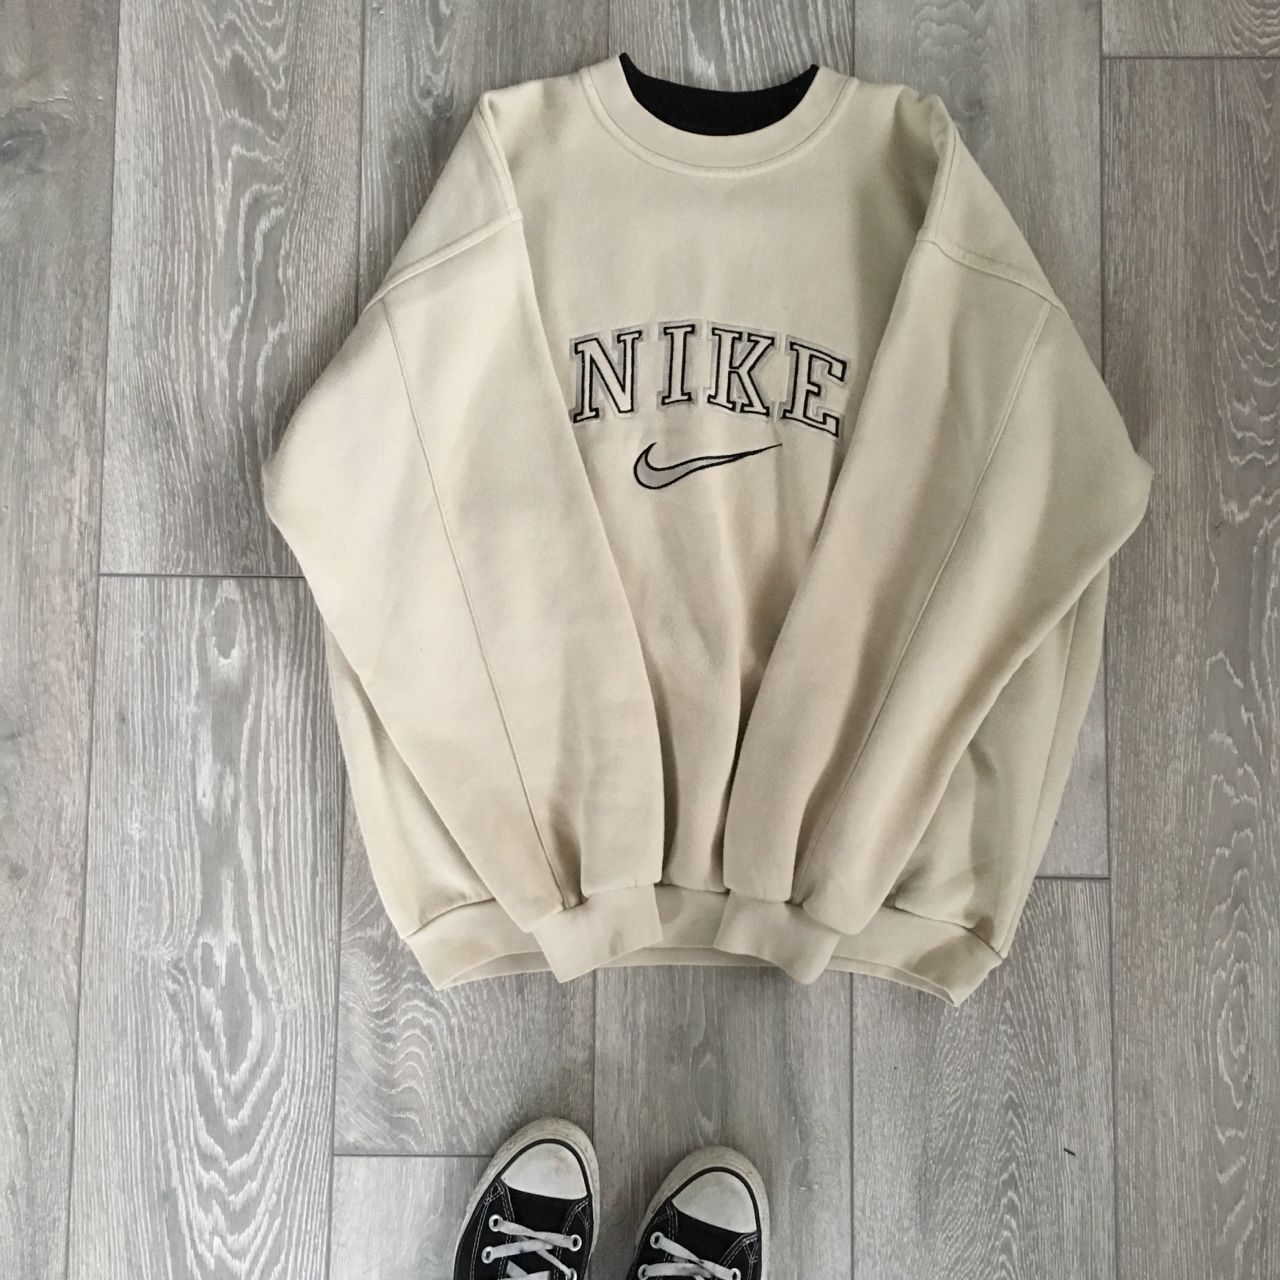 Have A
  Cool Crew Neck Sweatshirt For Winters